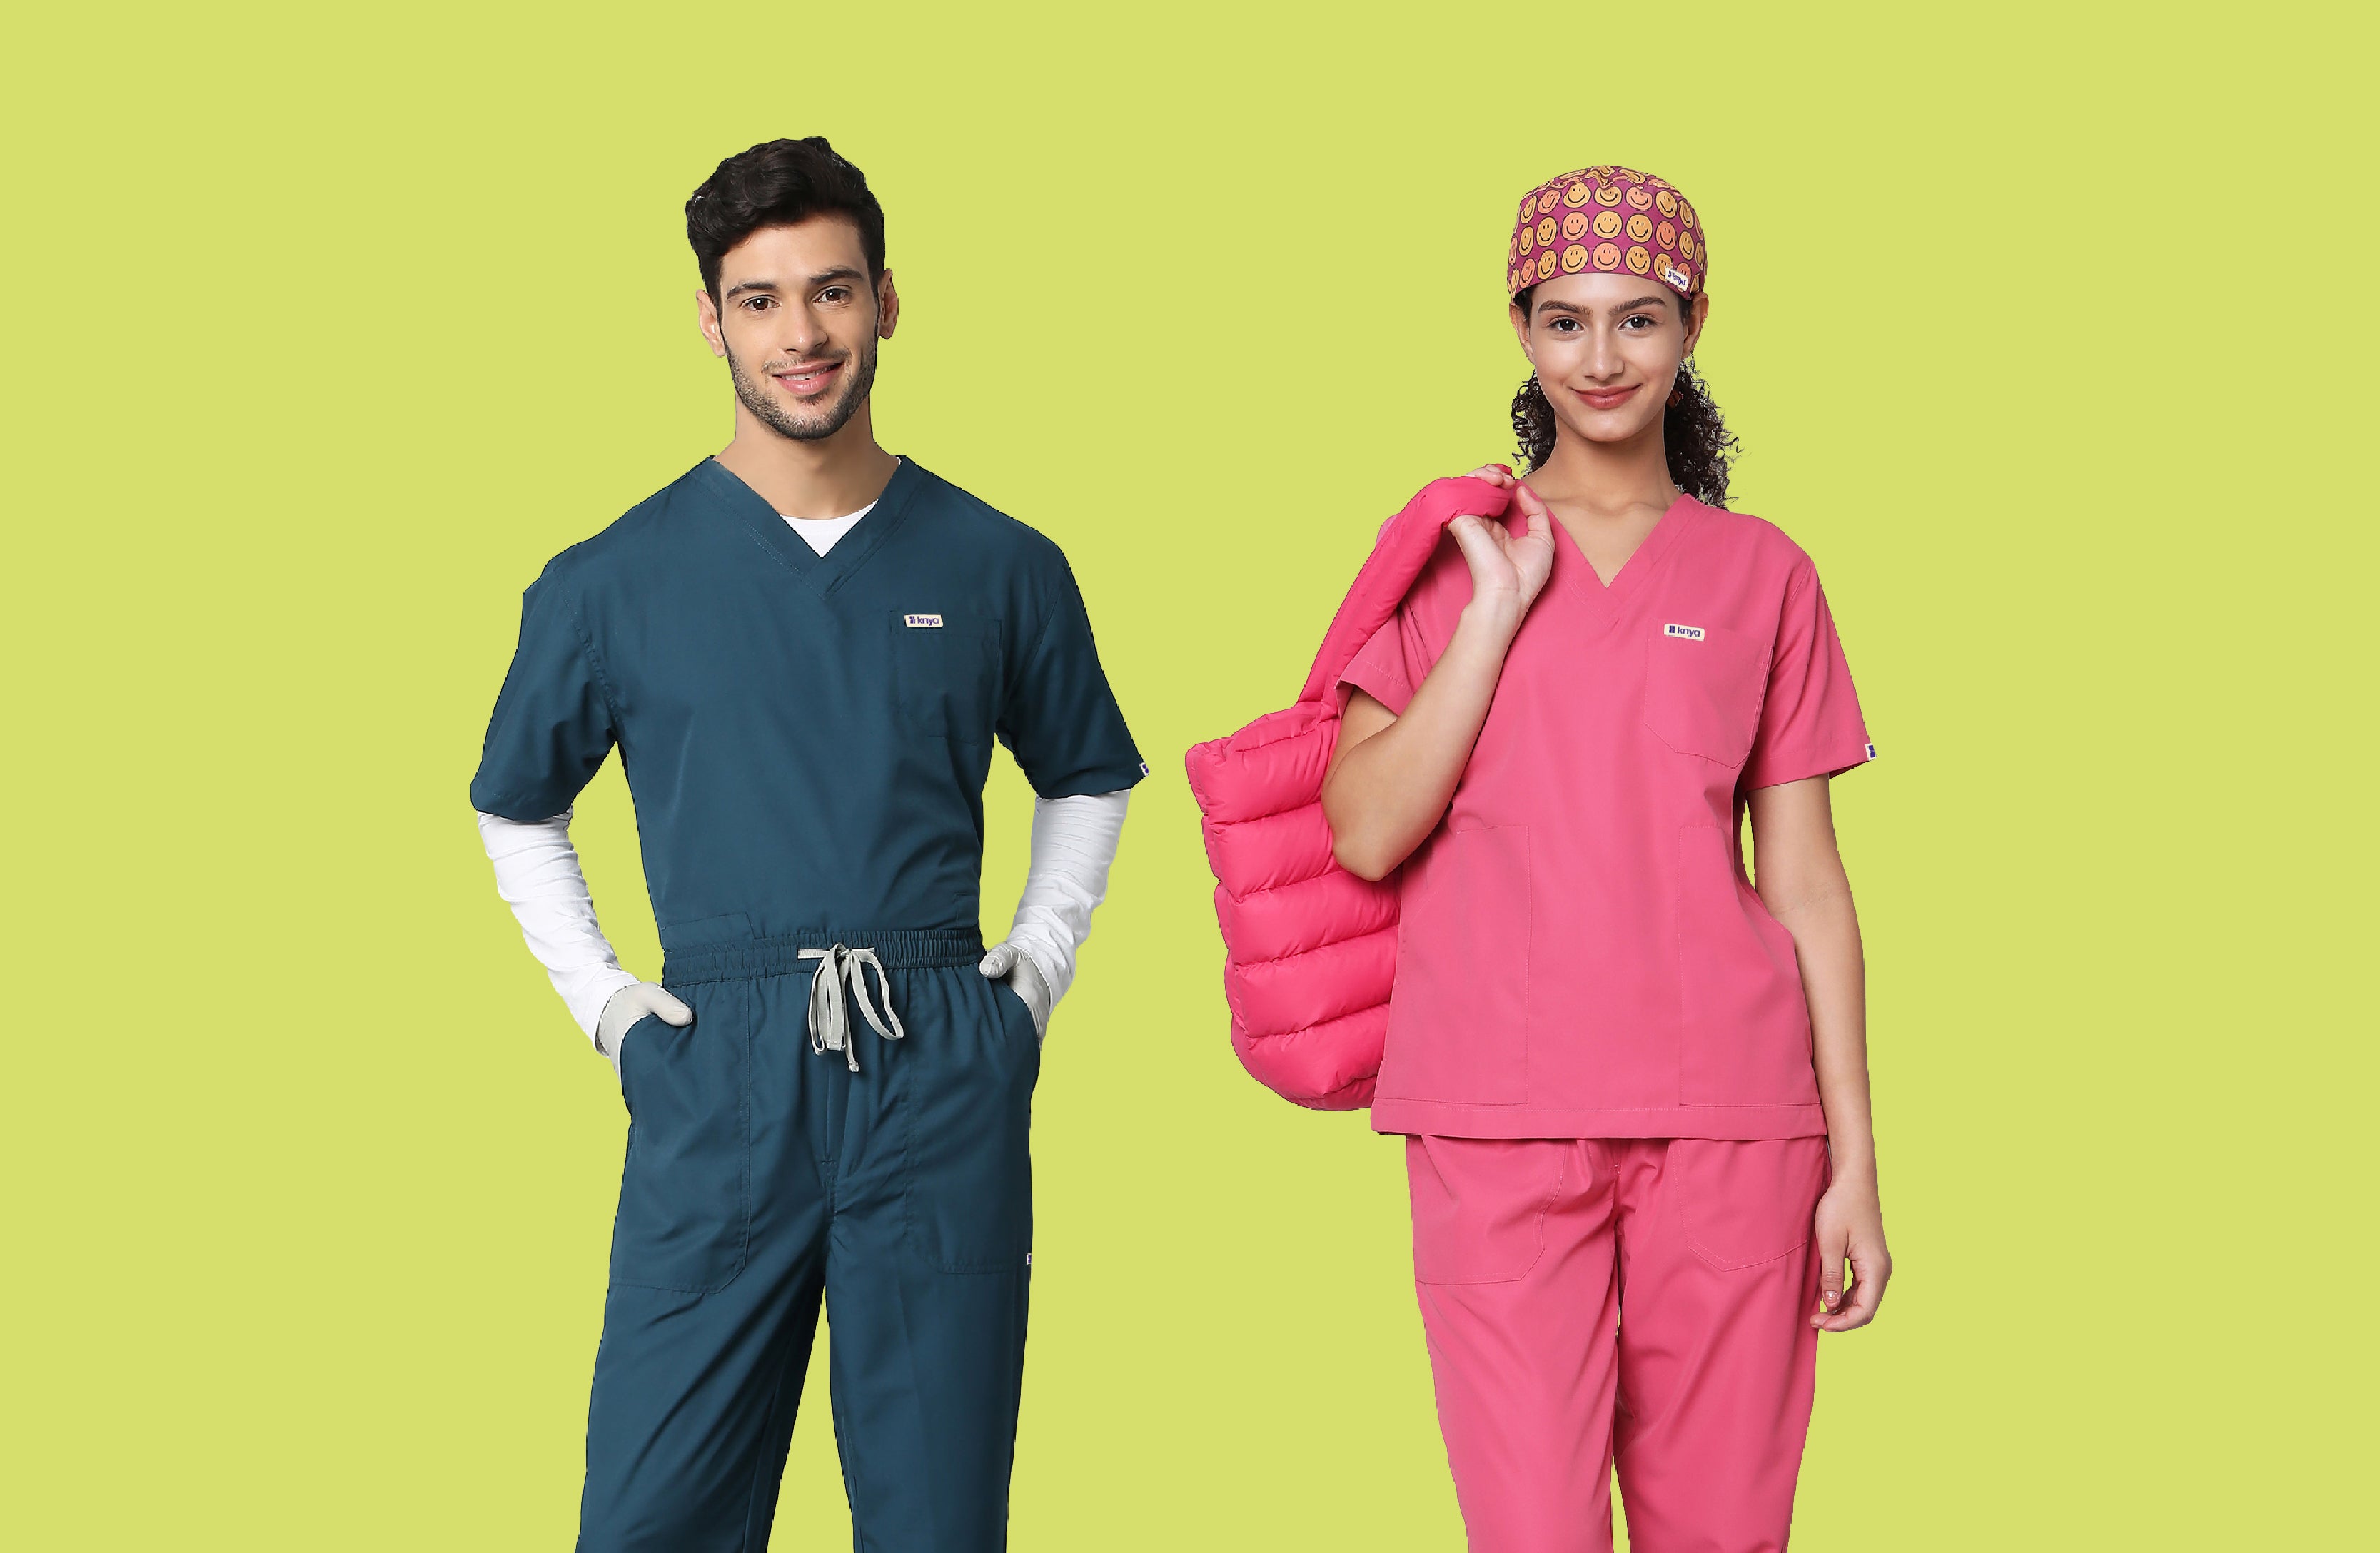 Scrubs with Style – Medical Apparel and Accessories for Nurses, Doctors,  Health Care Workers and Students